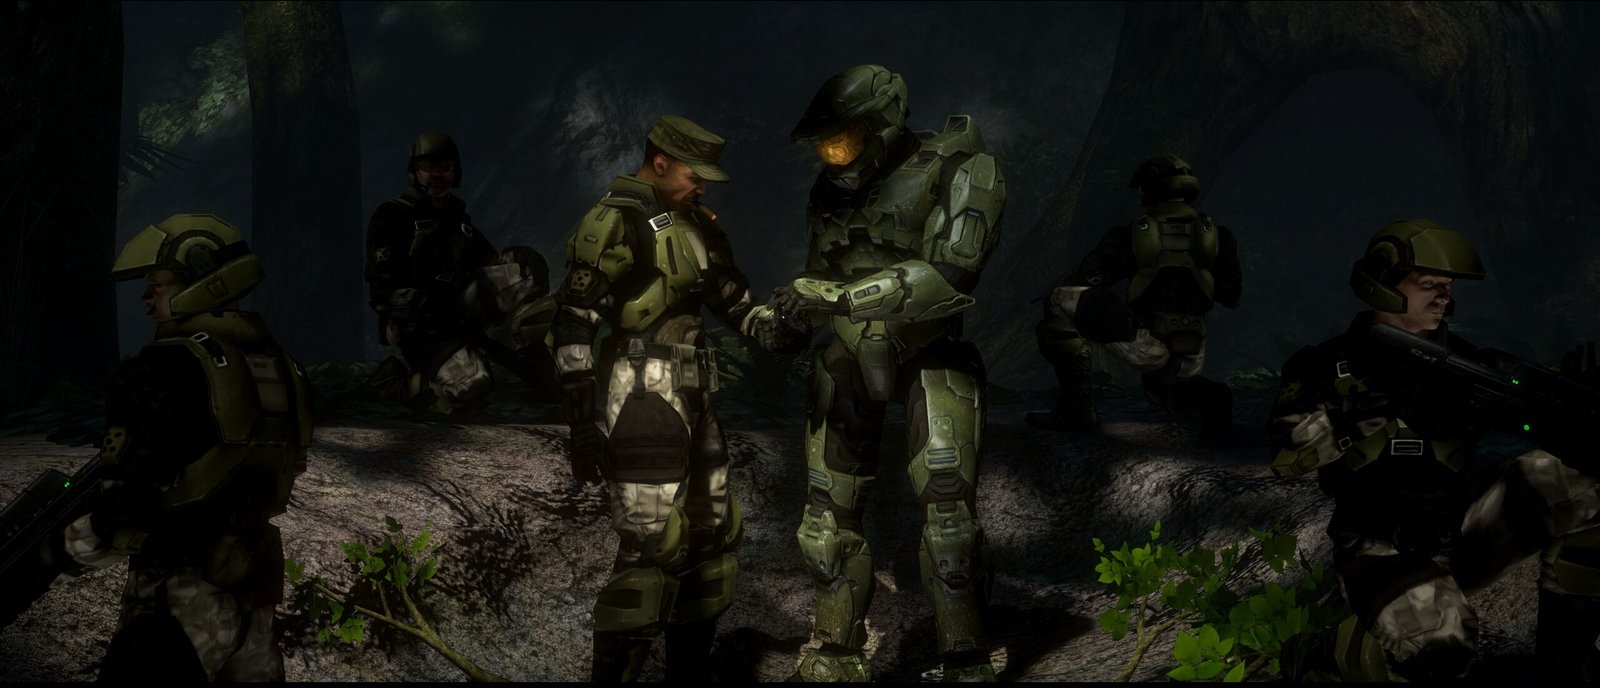 Chronological timeline for all of the halo games.